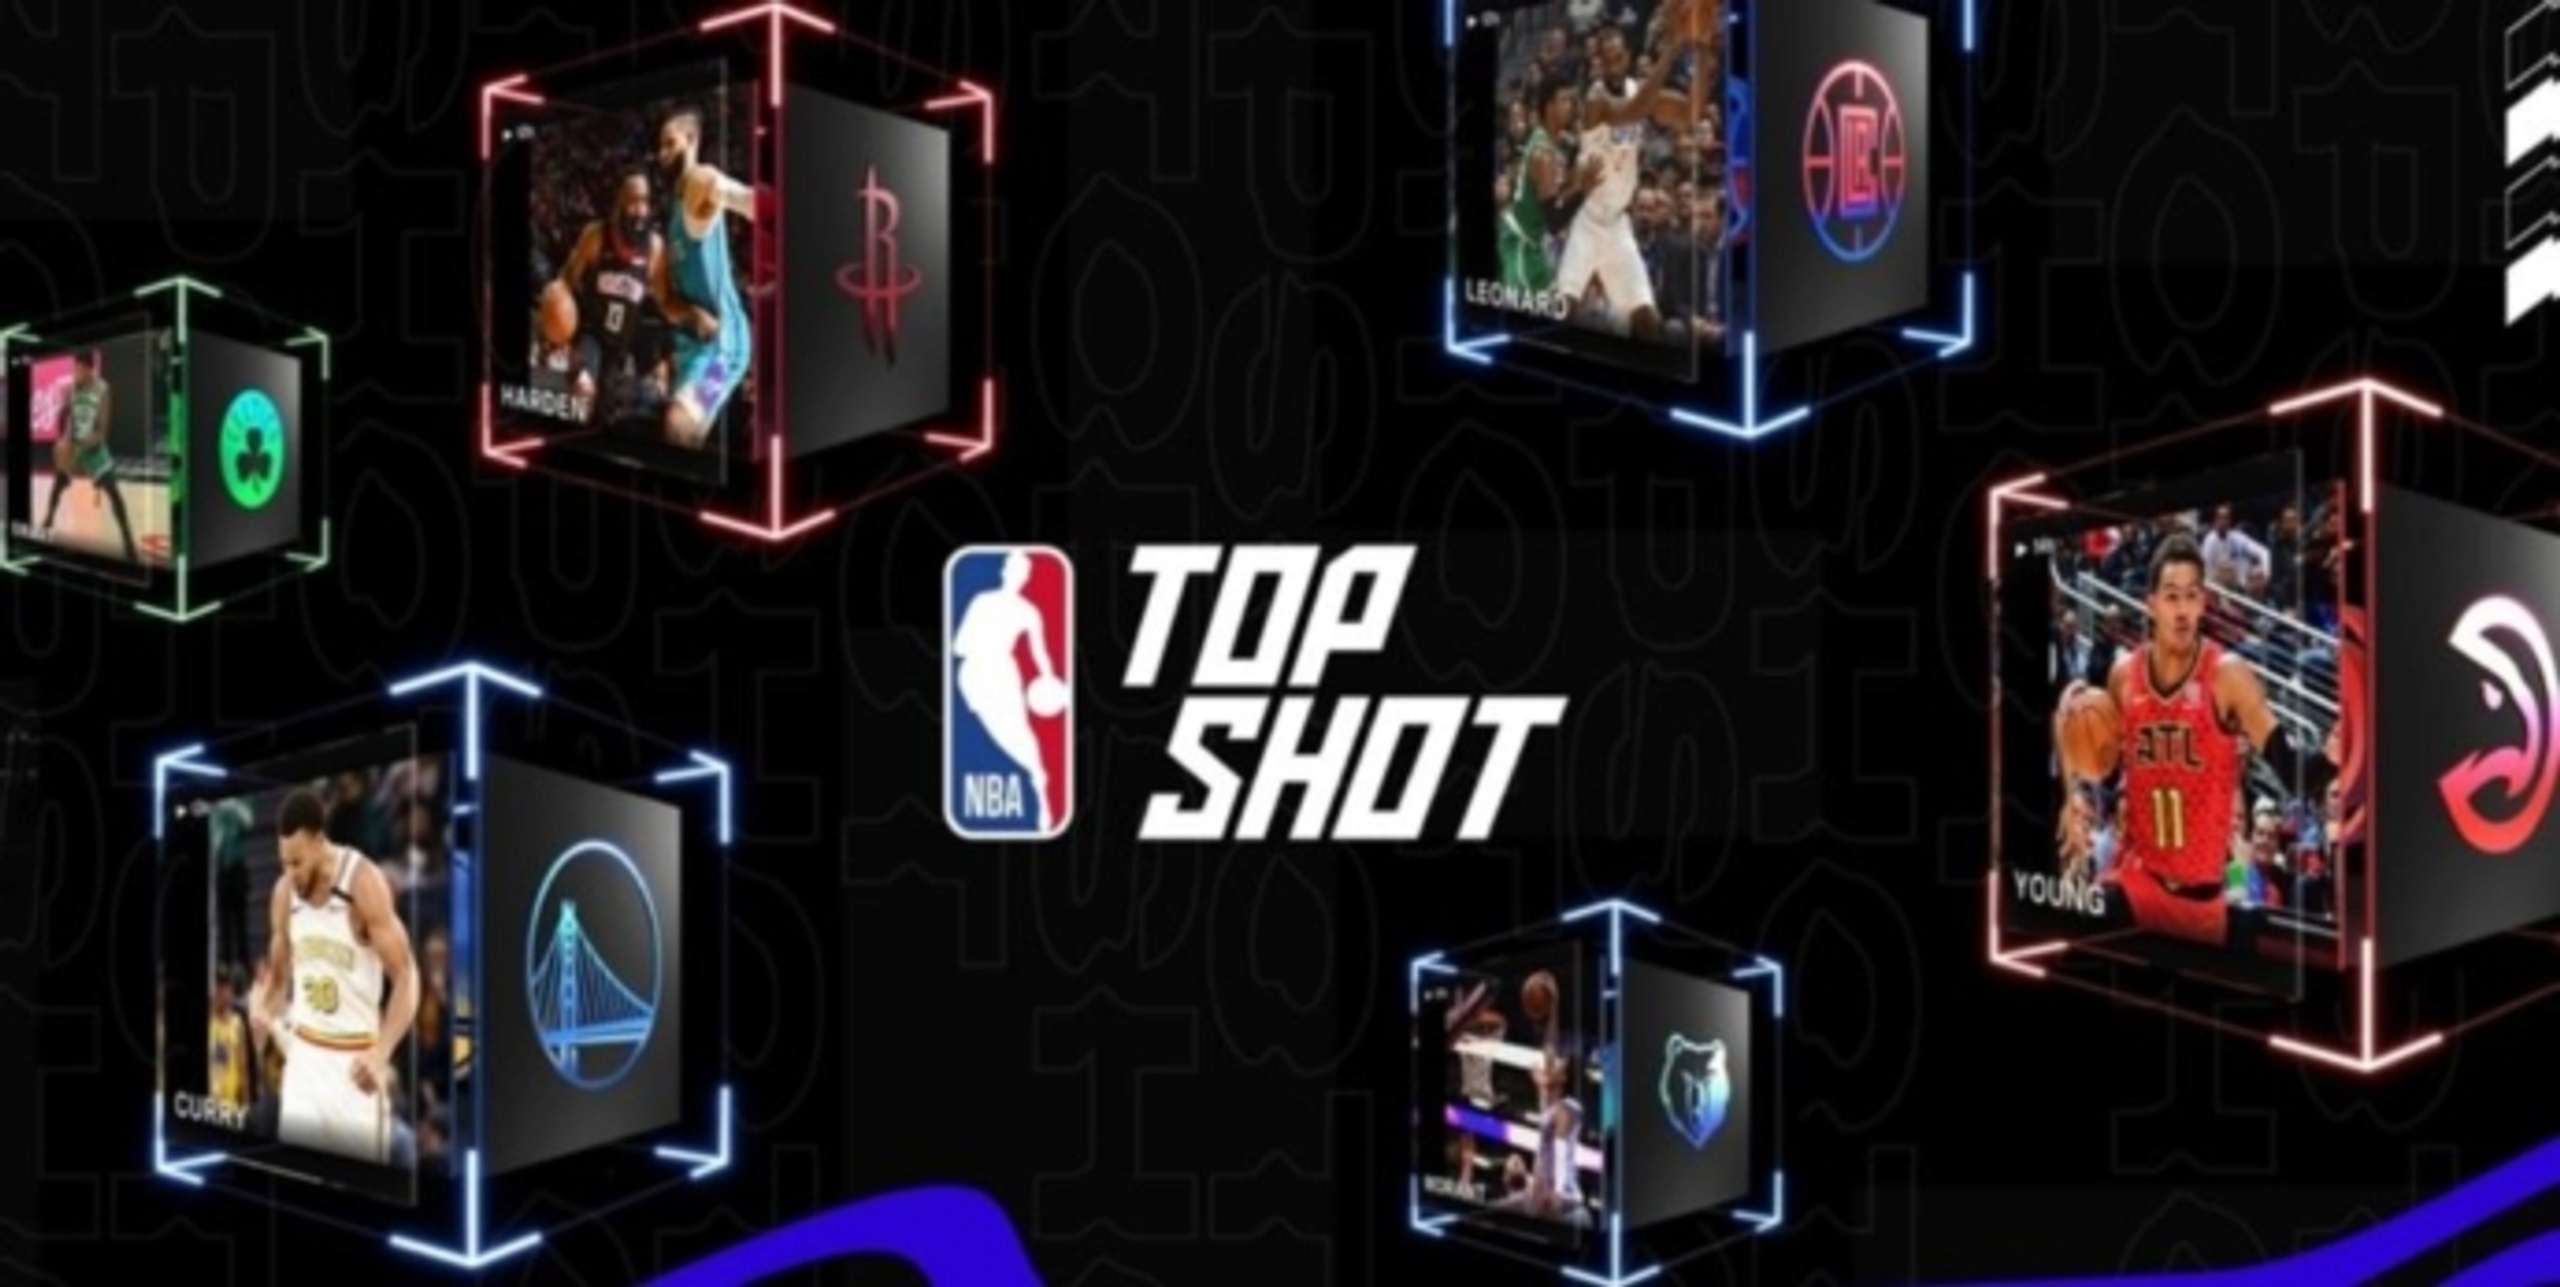 The future of collectibles: NBA Top Shot and trading cards can co-exist